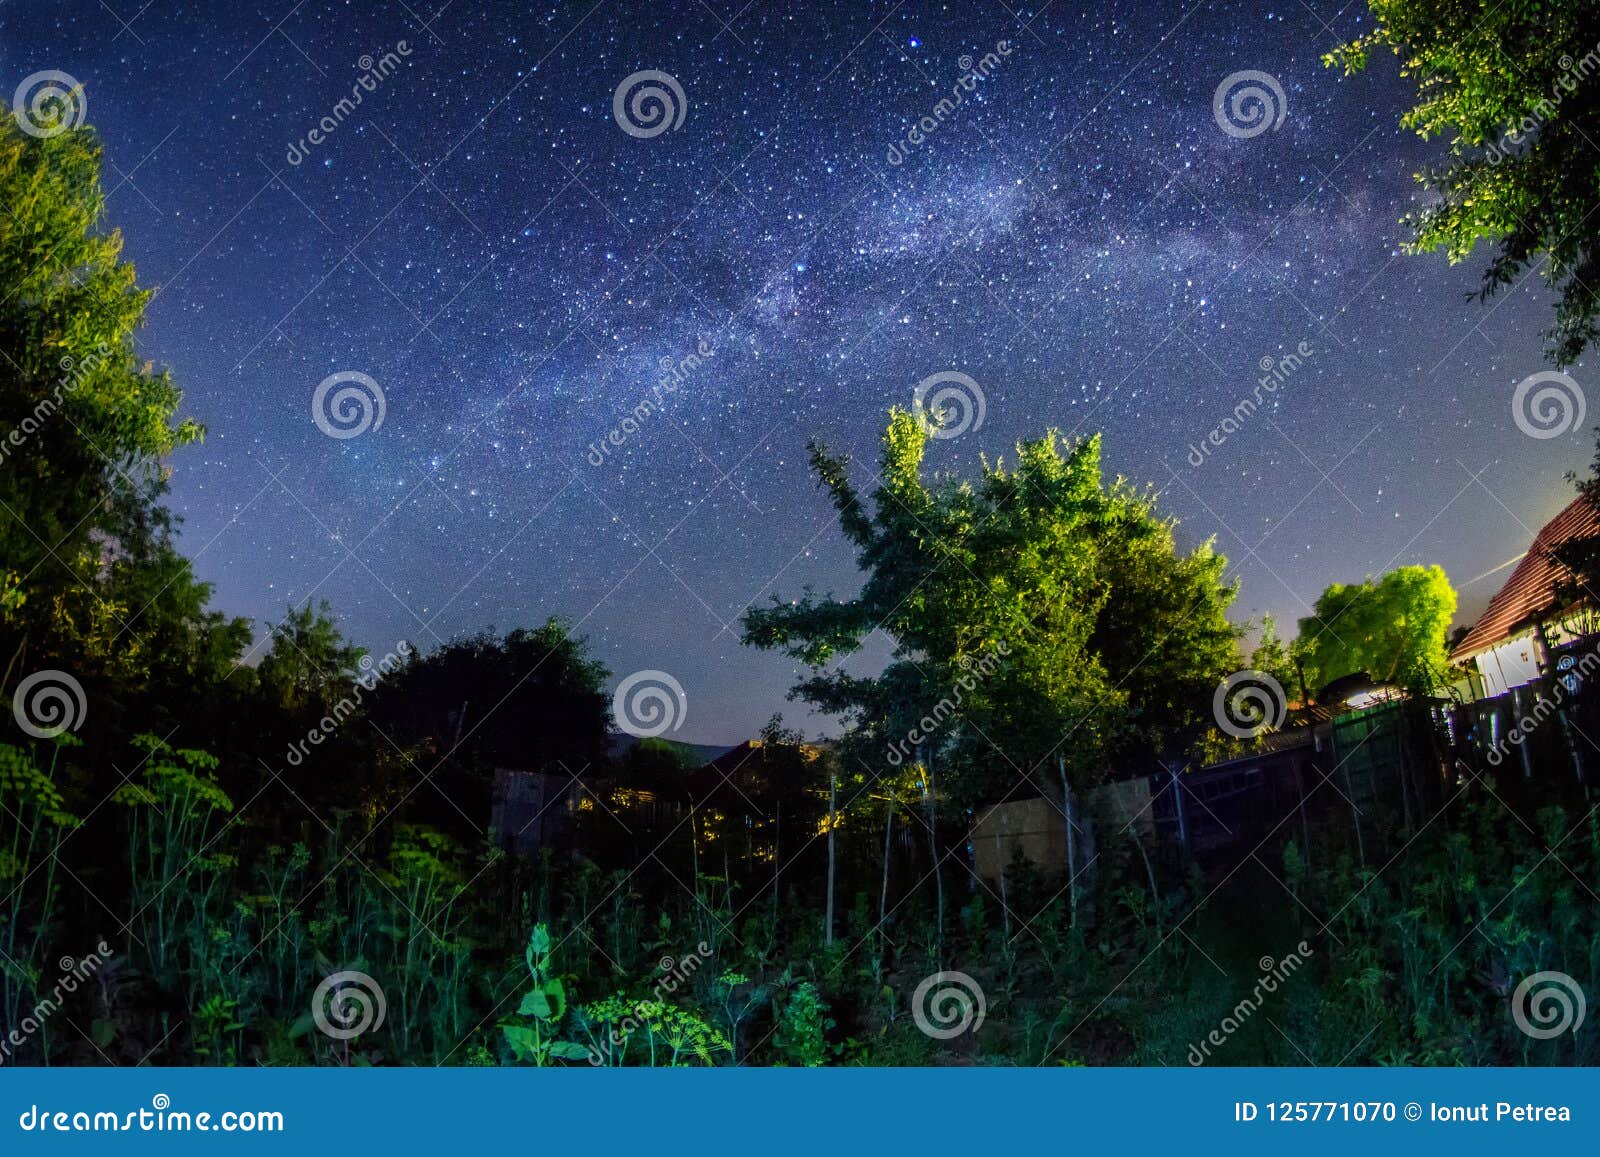 Milky Way Galaxy Shot In The Garden Stock Photo Image Of